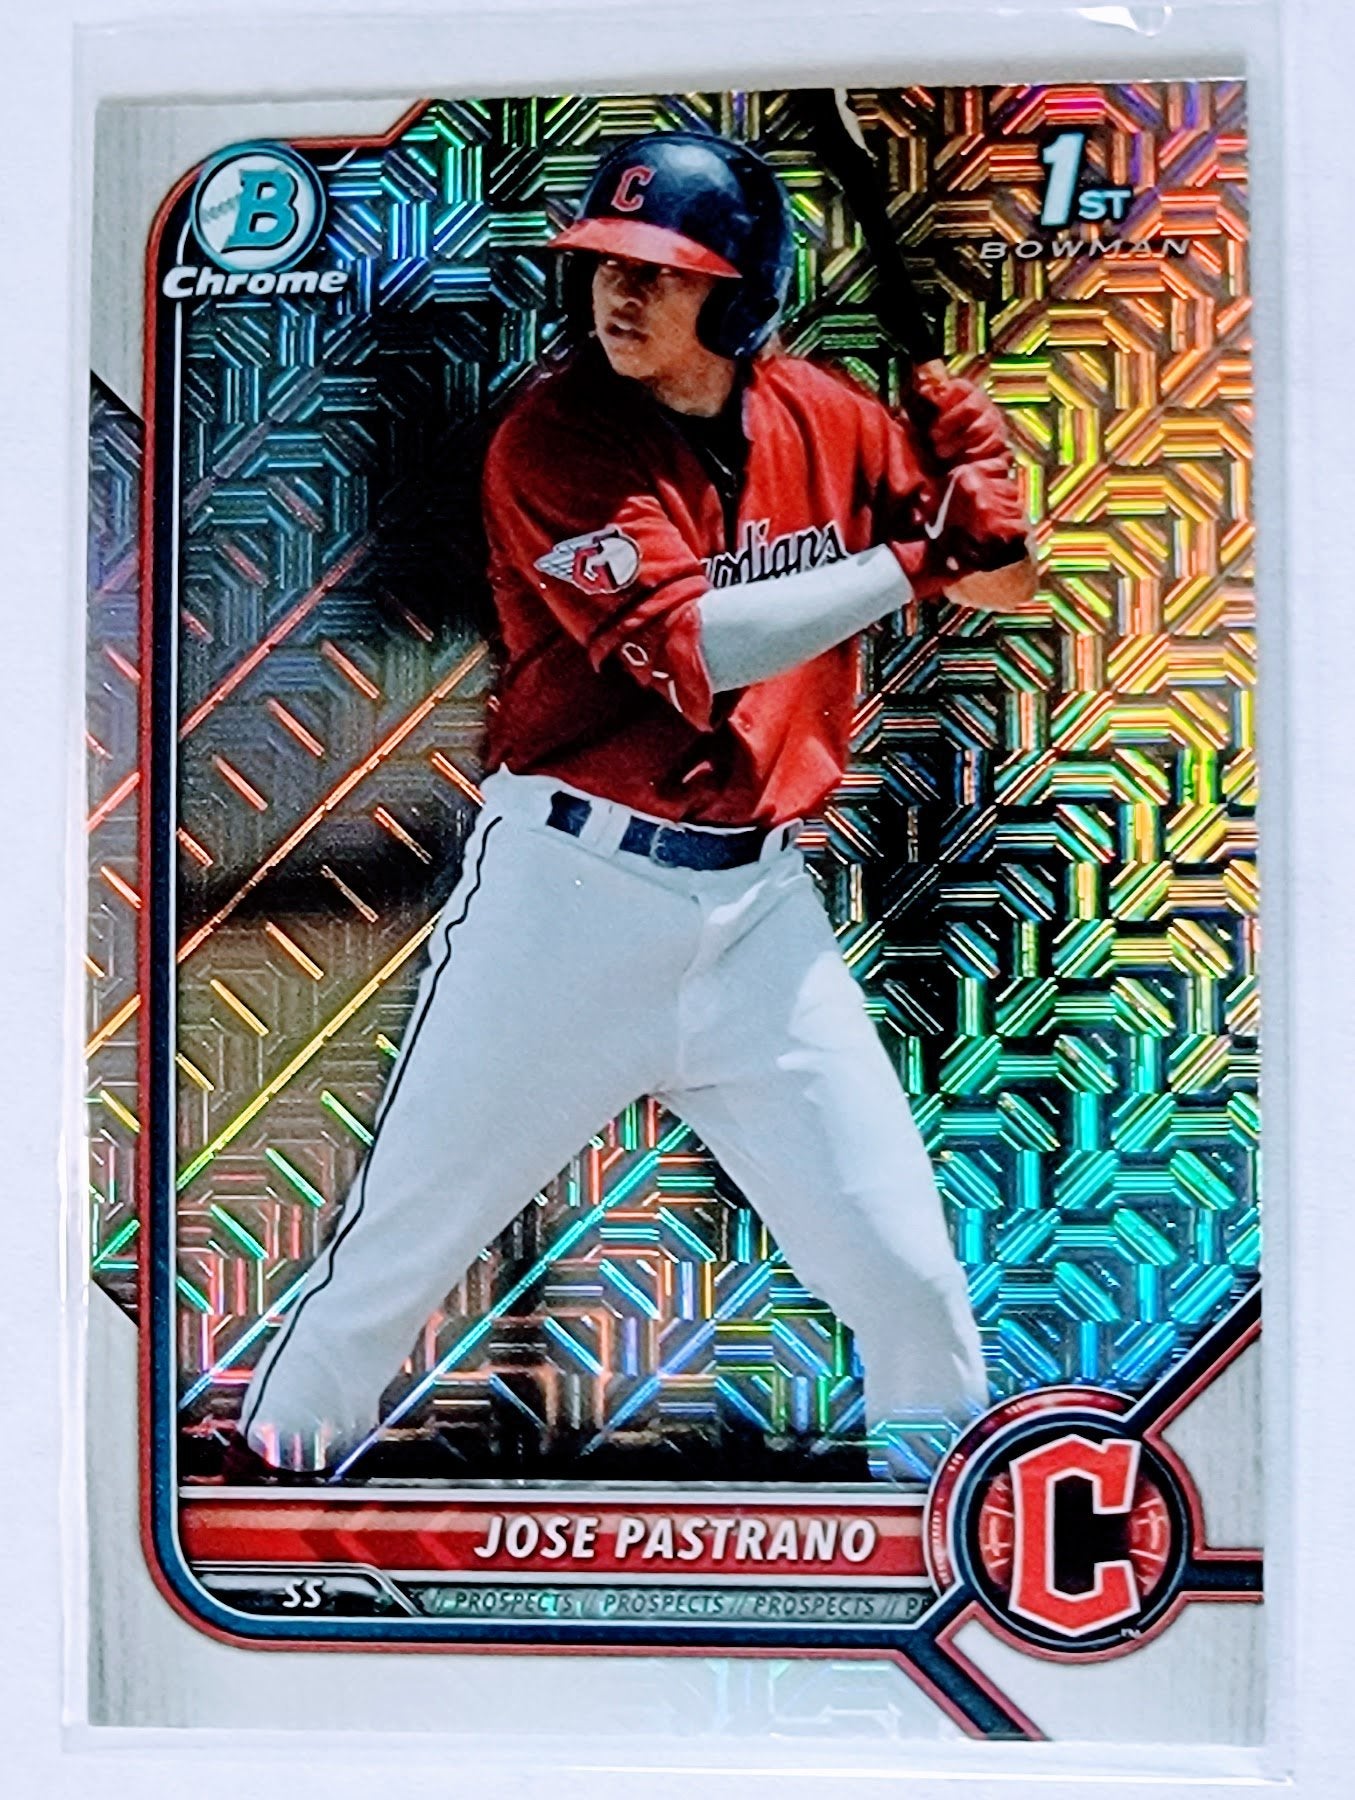 2022 Bowman Chrome Jose Pastrano 1st on Bowman Mojo Refractor Baseball Trading Card SMCB1 simple Xclusive Collectibles   